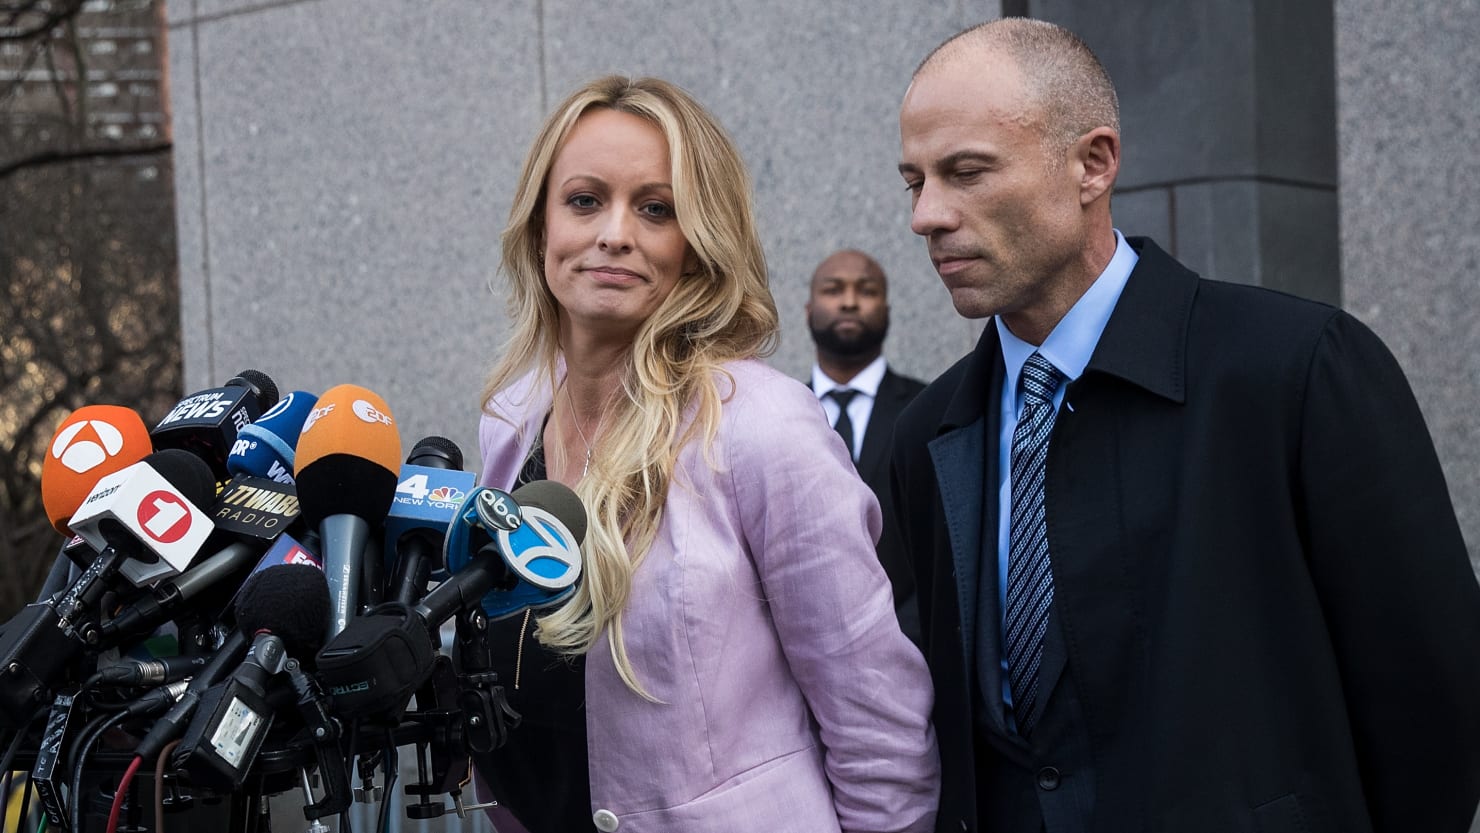 Michael Avenatti Forged Stormy Daniels’ Signature to Steal $300K: Feds